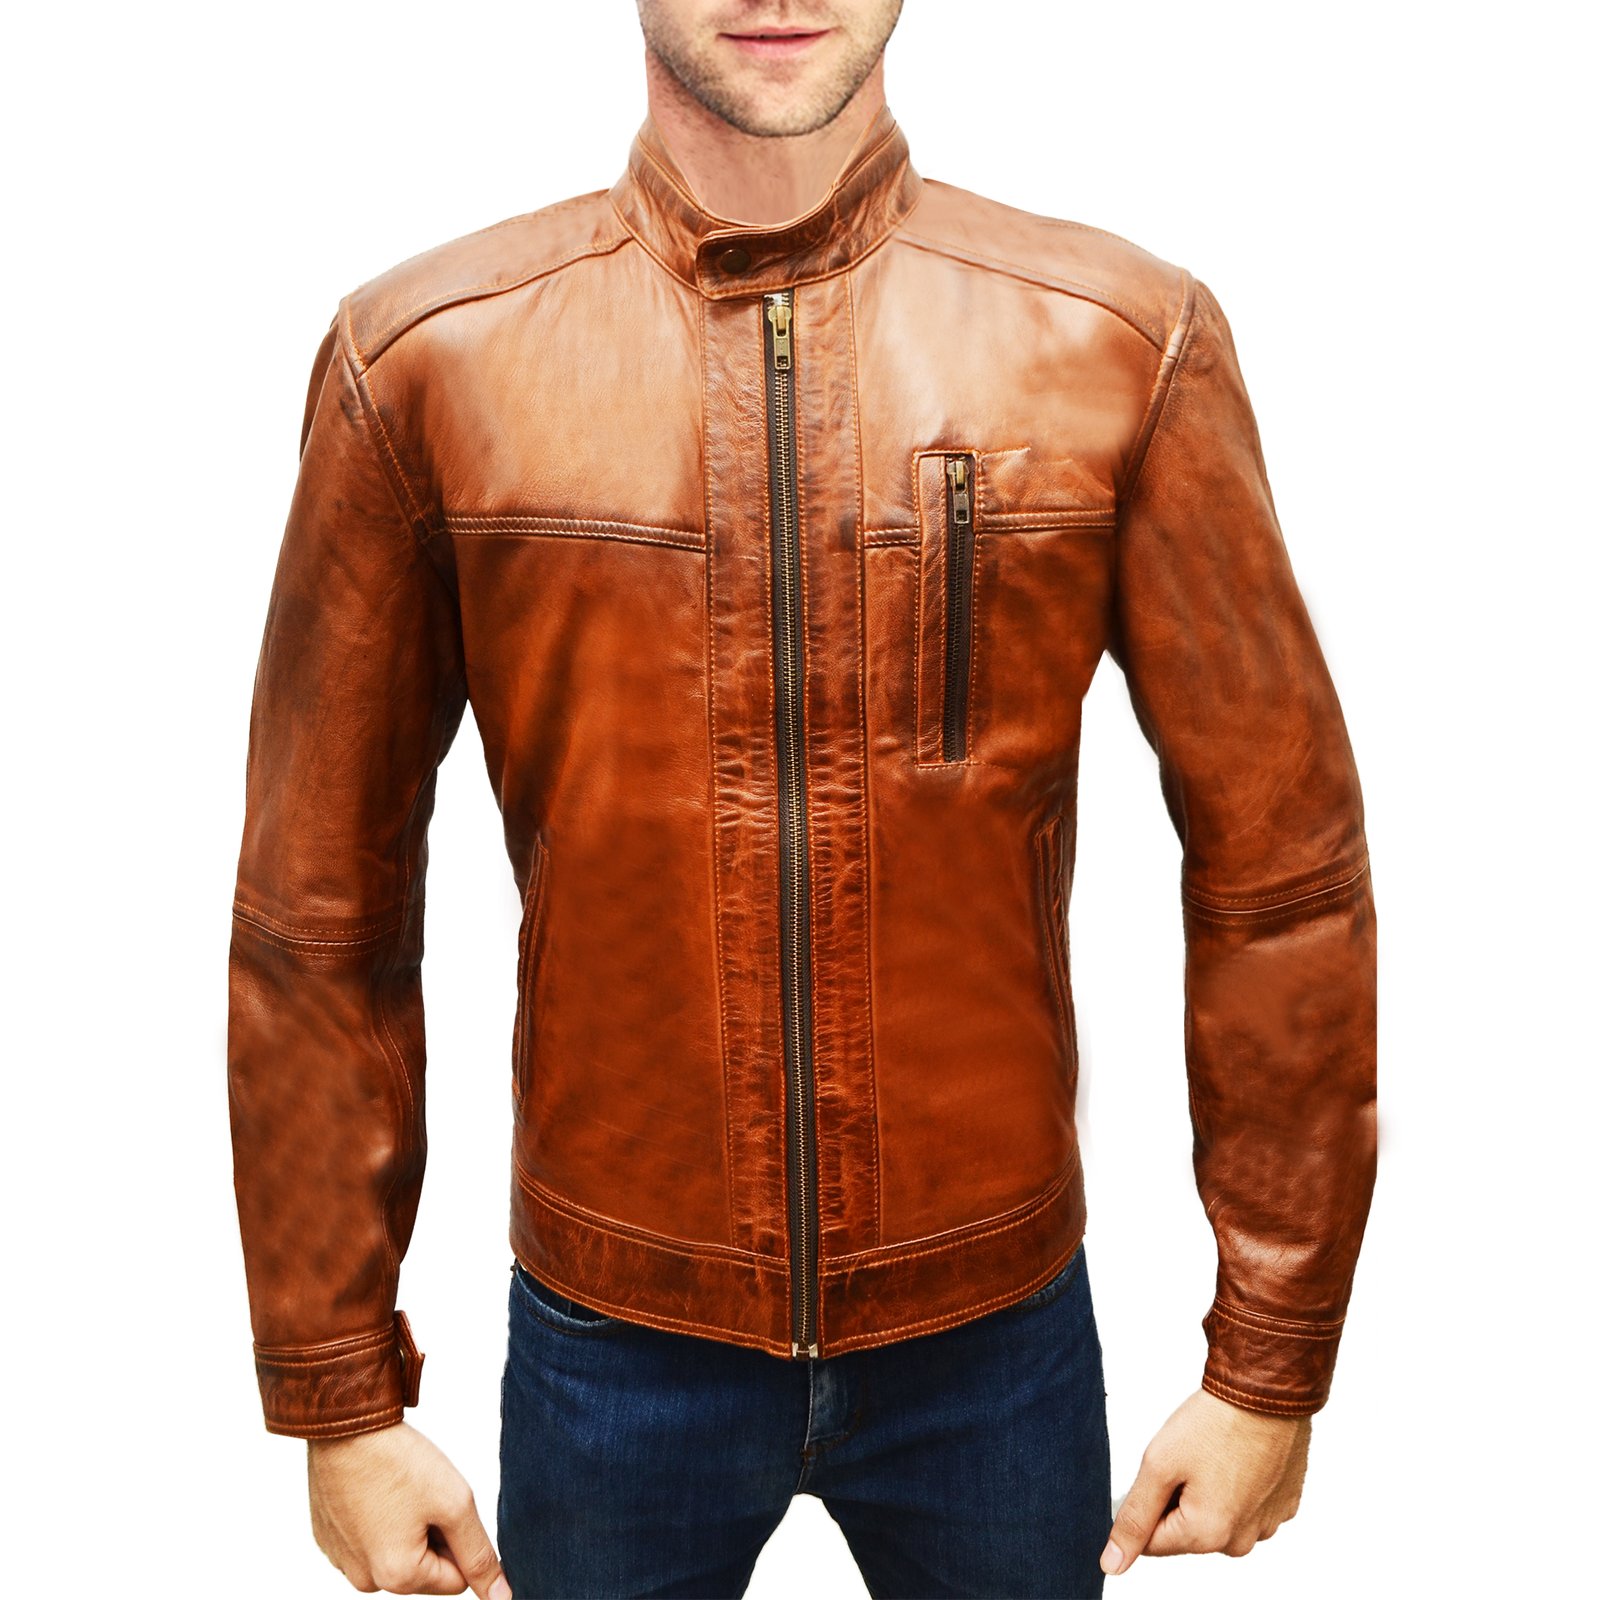 Distressed Brown Leather Jacket For Man